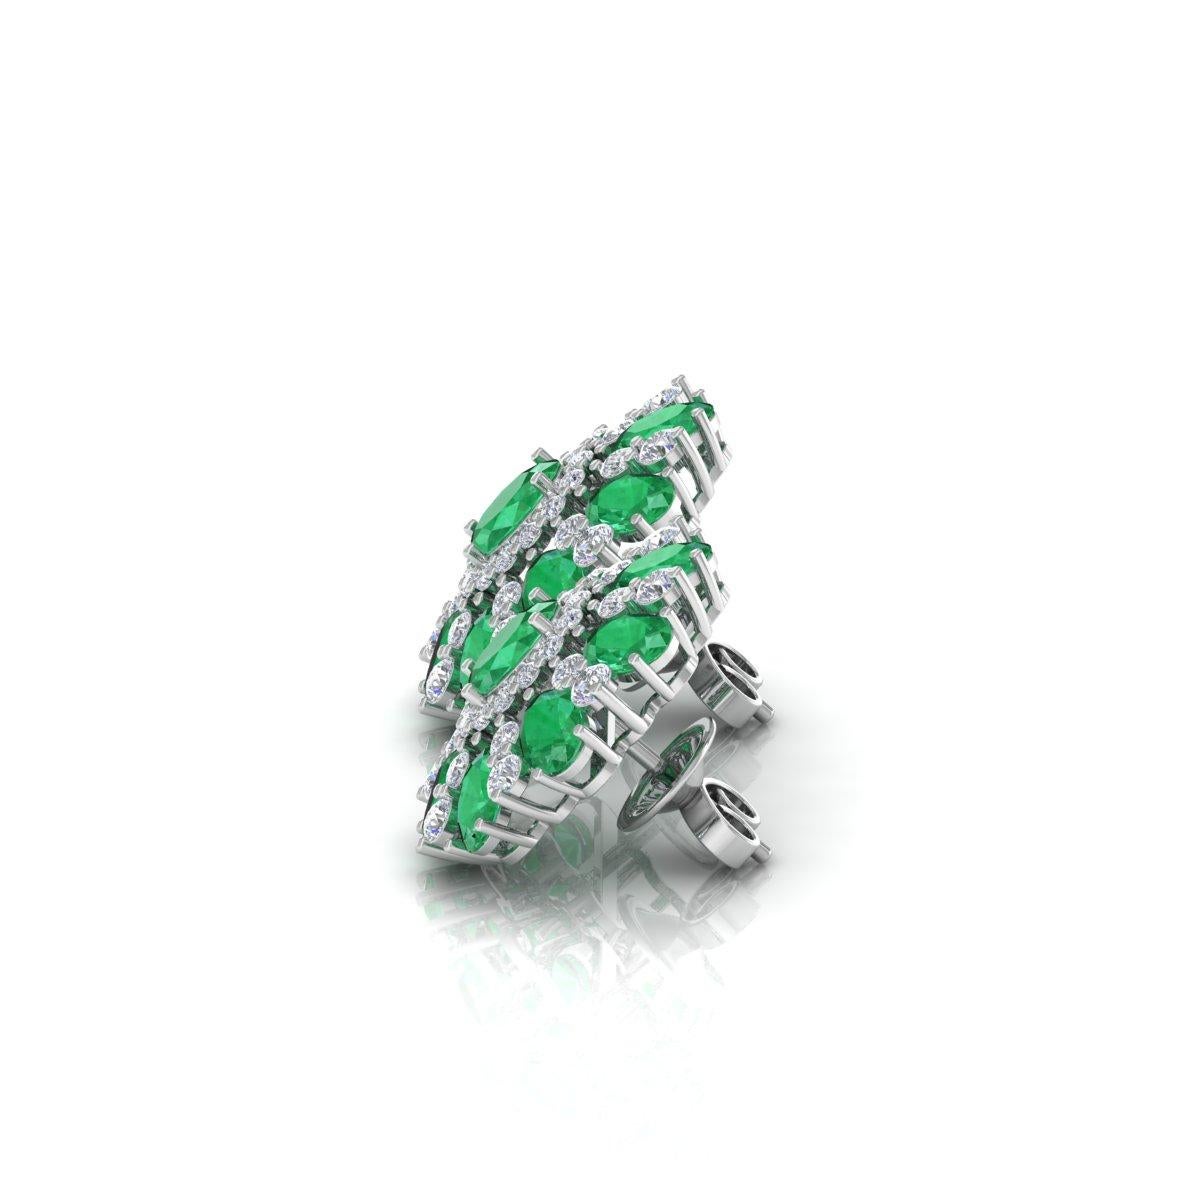 Item Code:- SEE-11767 (14k)
Gross Weight :- 9.21 gm
14k White Gold Weight :- 7.40 gm
Natural Diamond Weight :- 1.70 ct  ( AVERAGE DIAMOND CLARITY SI1-SI2 & COLOR H-I )
Zambian Emerald Weight :- 7.35 ct
Earring Size : 22 mm (approx.)

✦